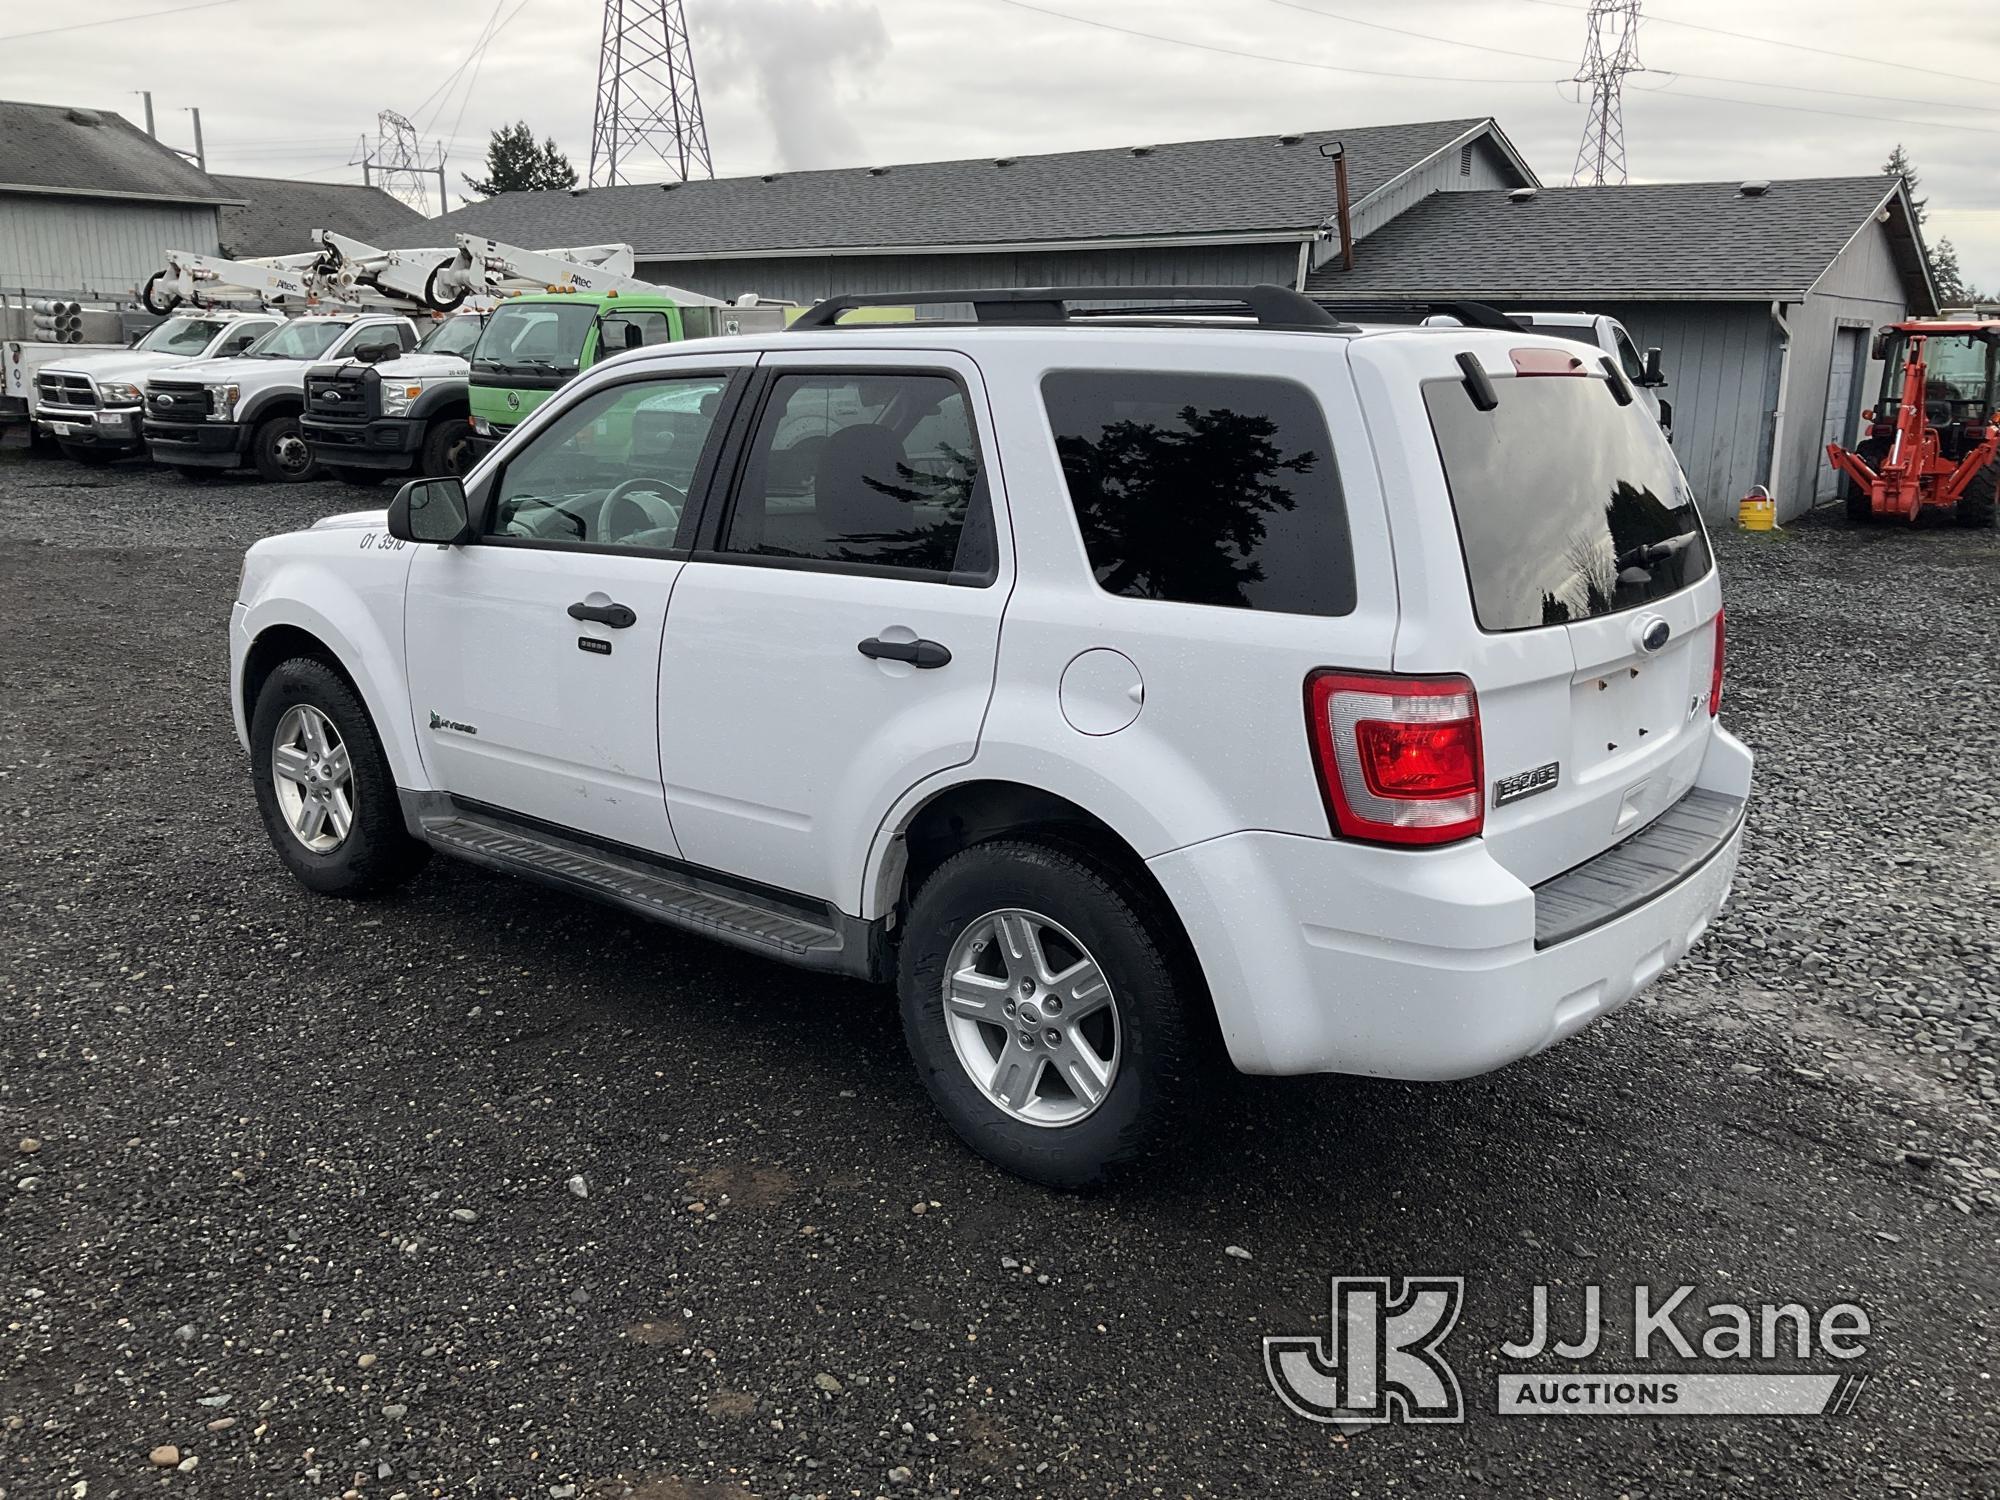 (Tacoma, WA) 2011 Ford Escape Hybrid AWD 4-Door Sport Utility Vehicle Runs & Moves, New Tires